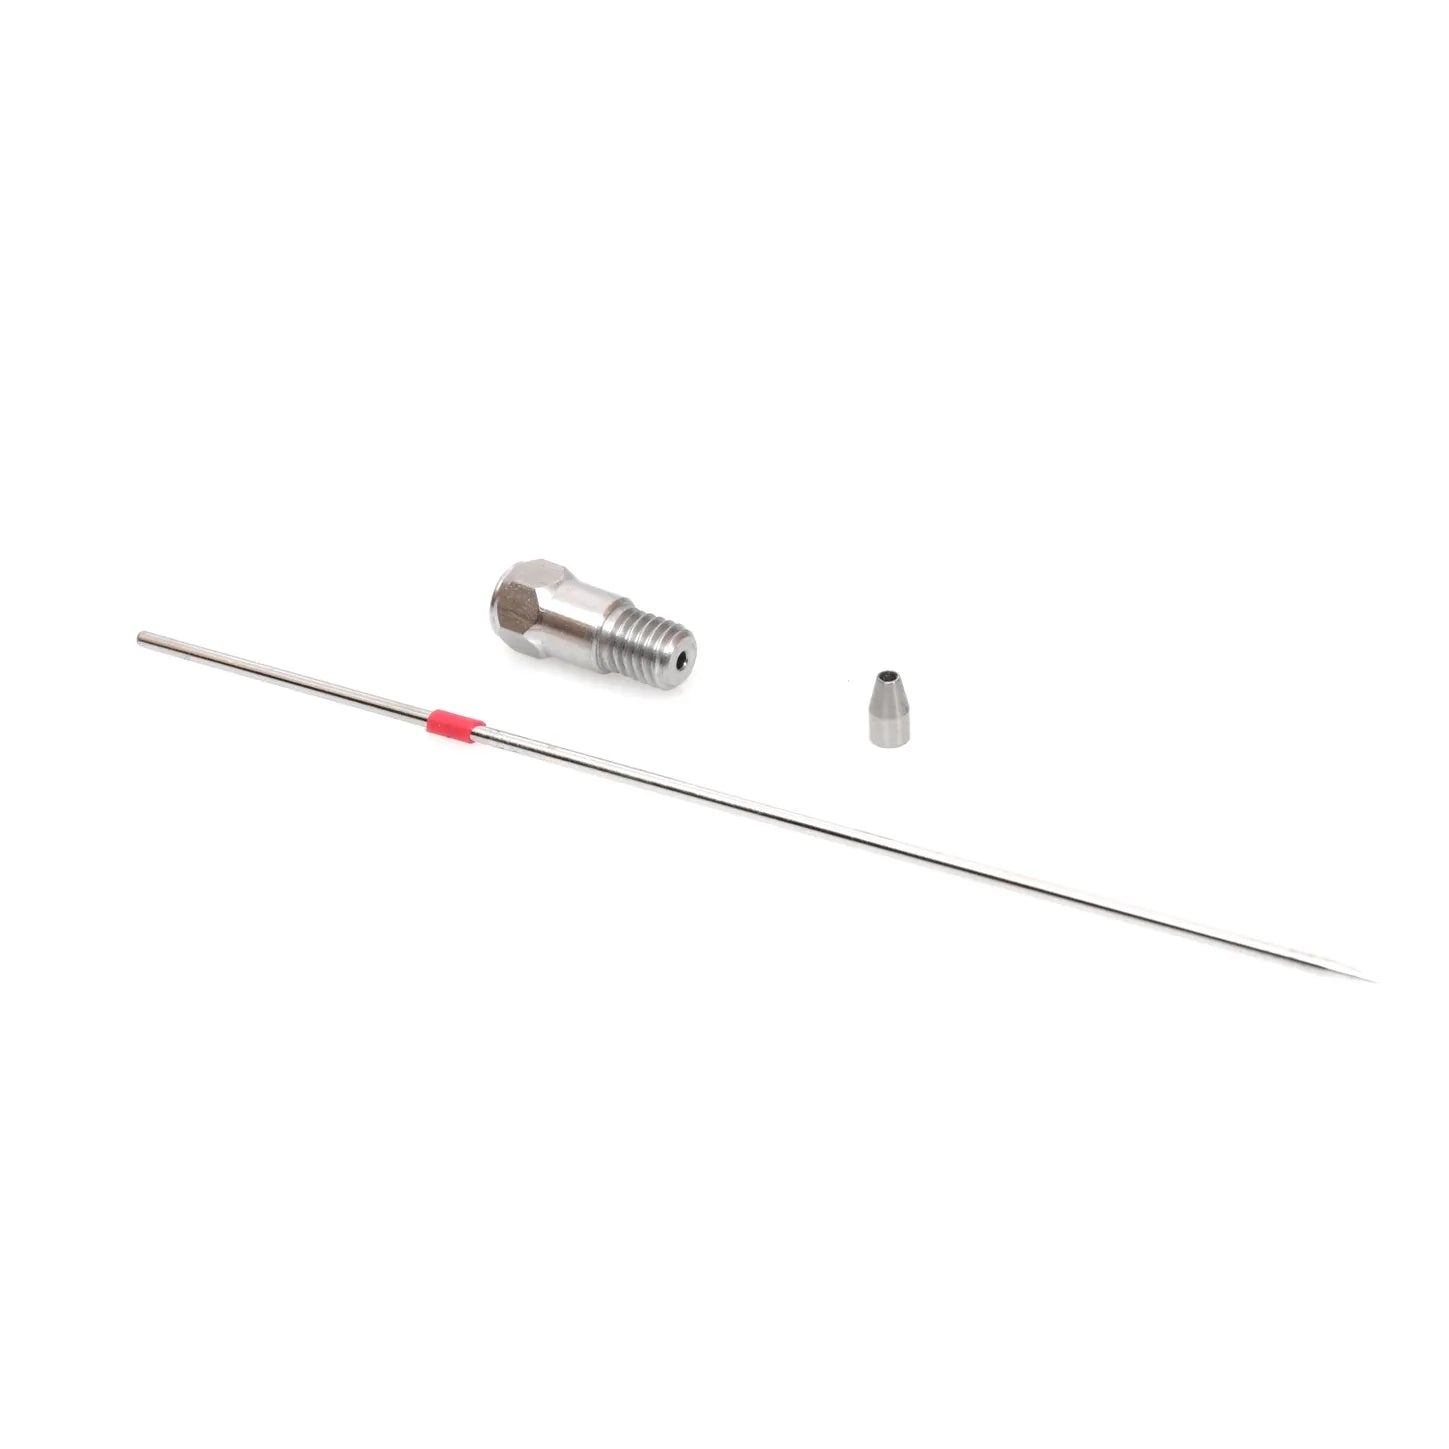 Pt Coated Needle, 30 Series, Comparable to Shimadzu # 228-41024-95, 5041629(Sciex™)